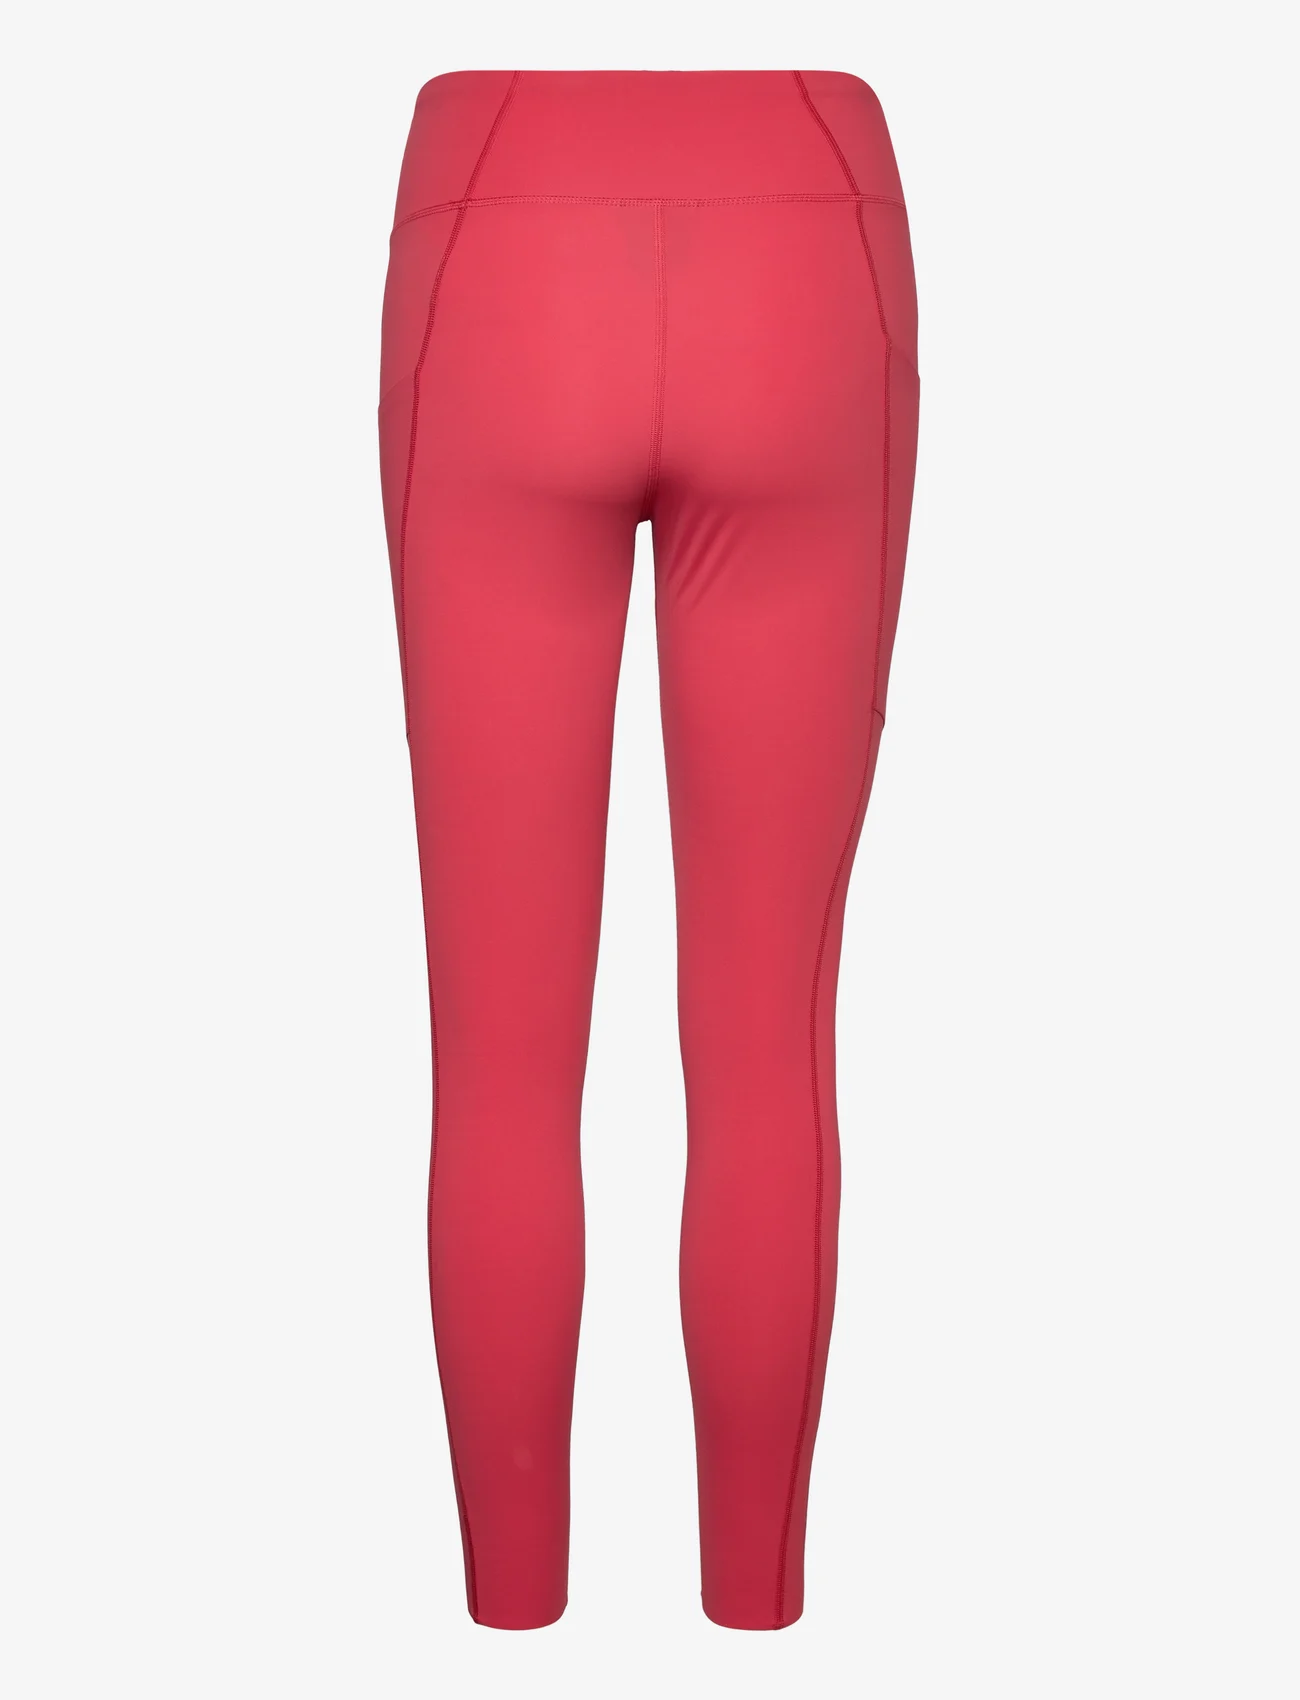 Peak Performance - W Power Tights-SOFTER RED - kompressionsleggings - softer red - 1